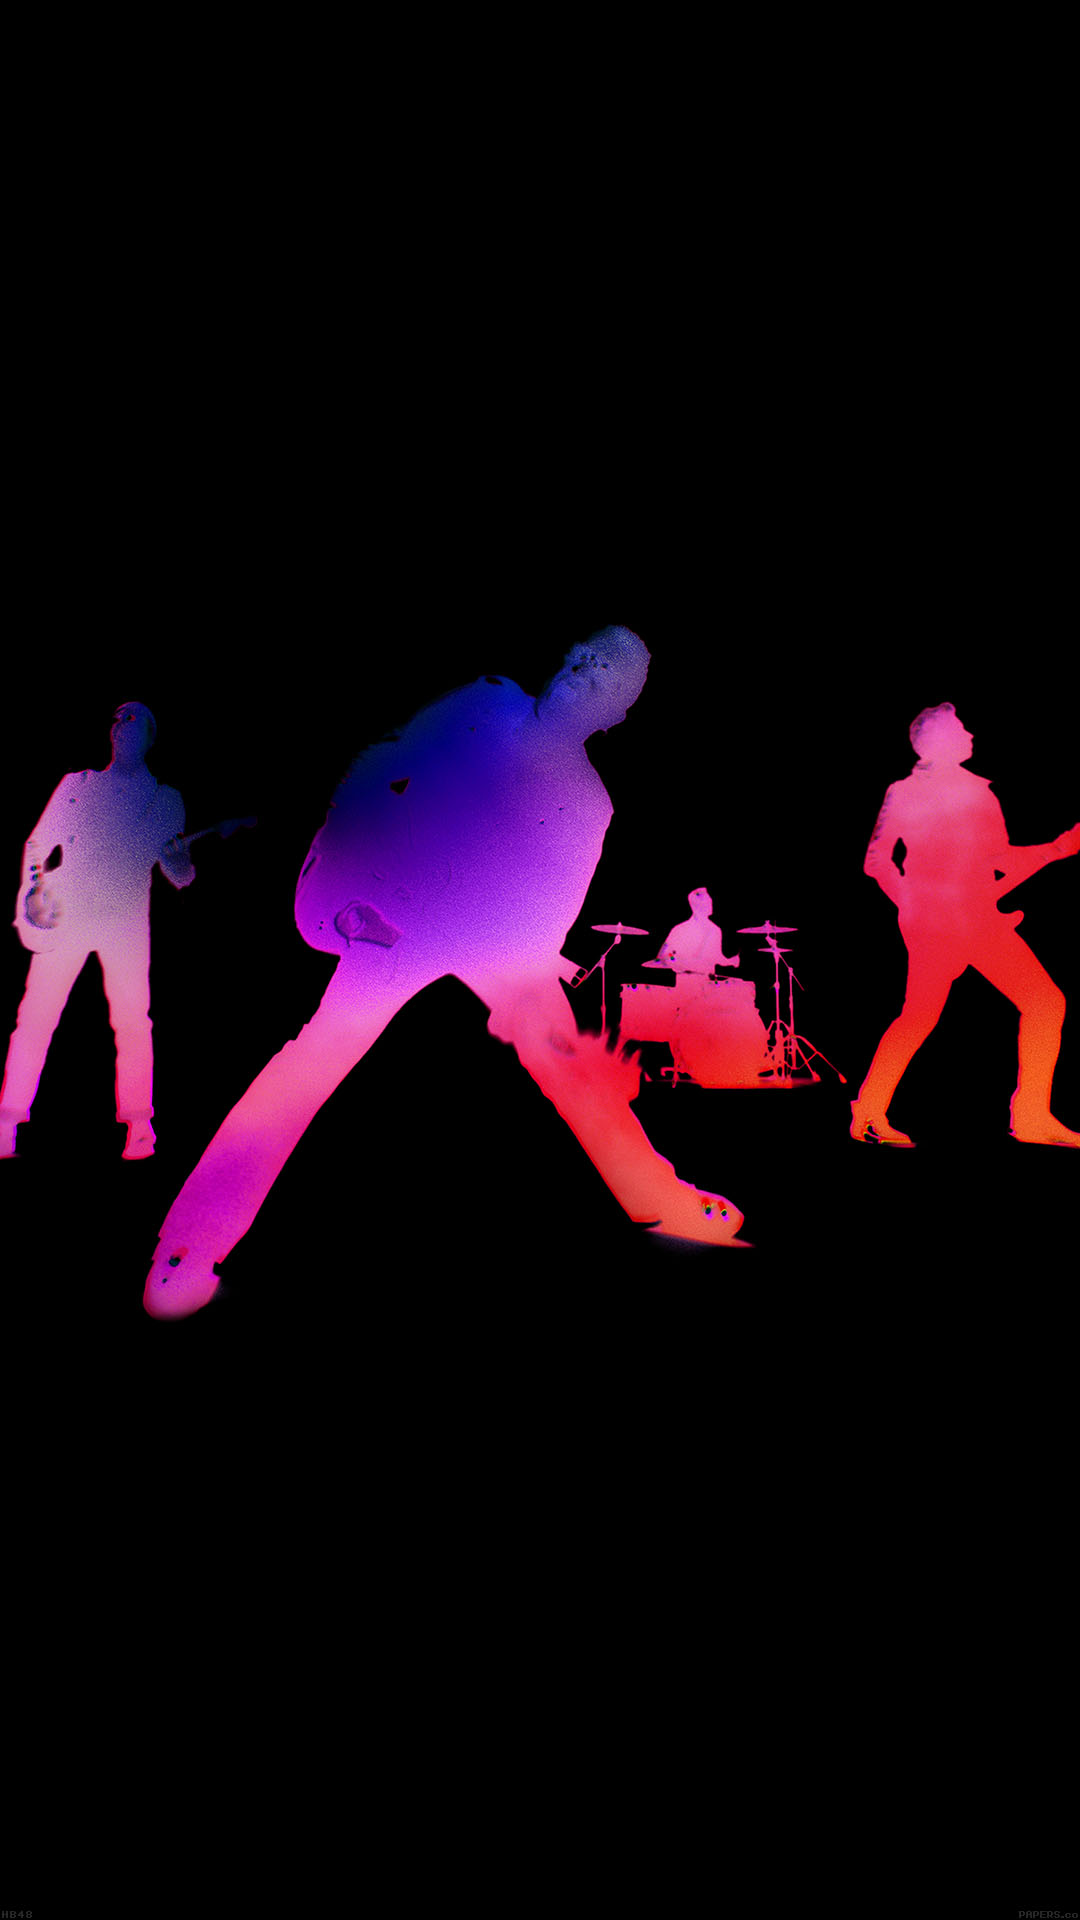 U2 Free Music Android wallpaper